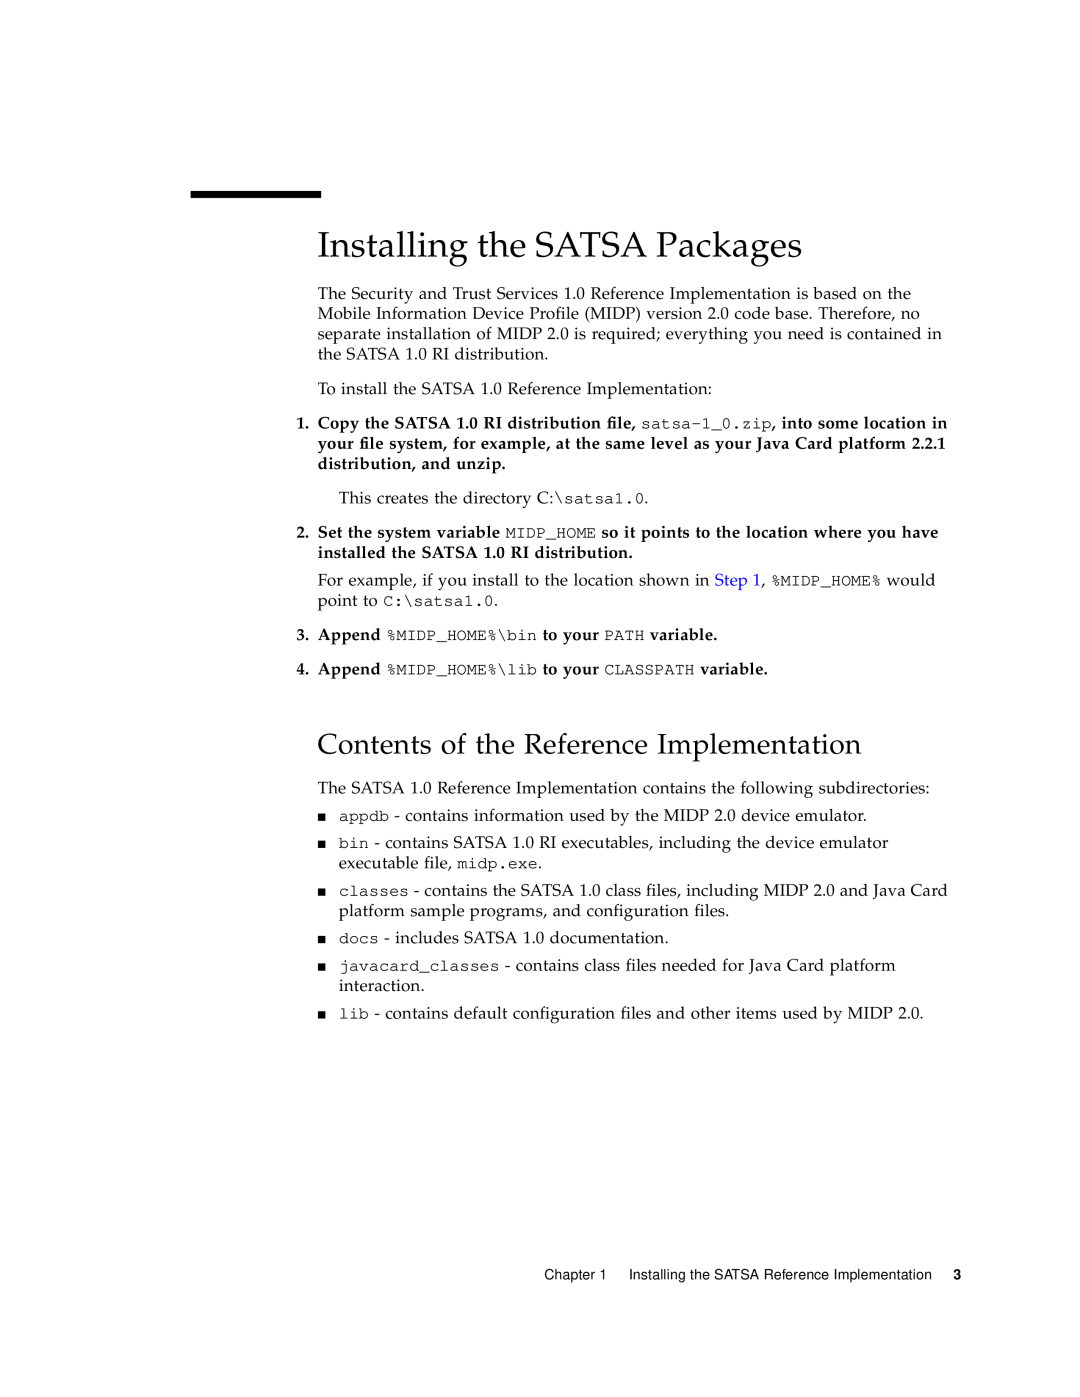 Sun Microsystems 1 manual Installing the SATSA Packages, Contents of the Reference Implementation 